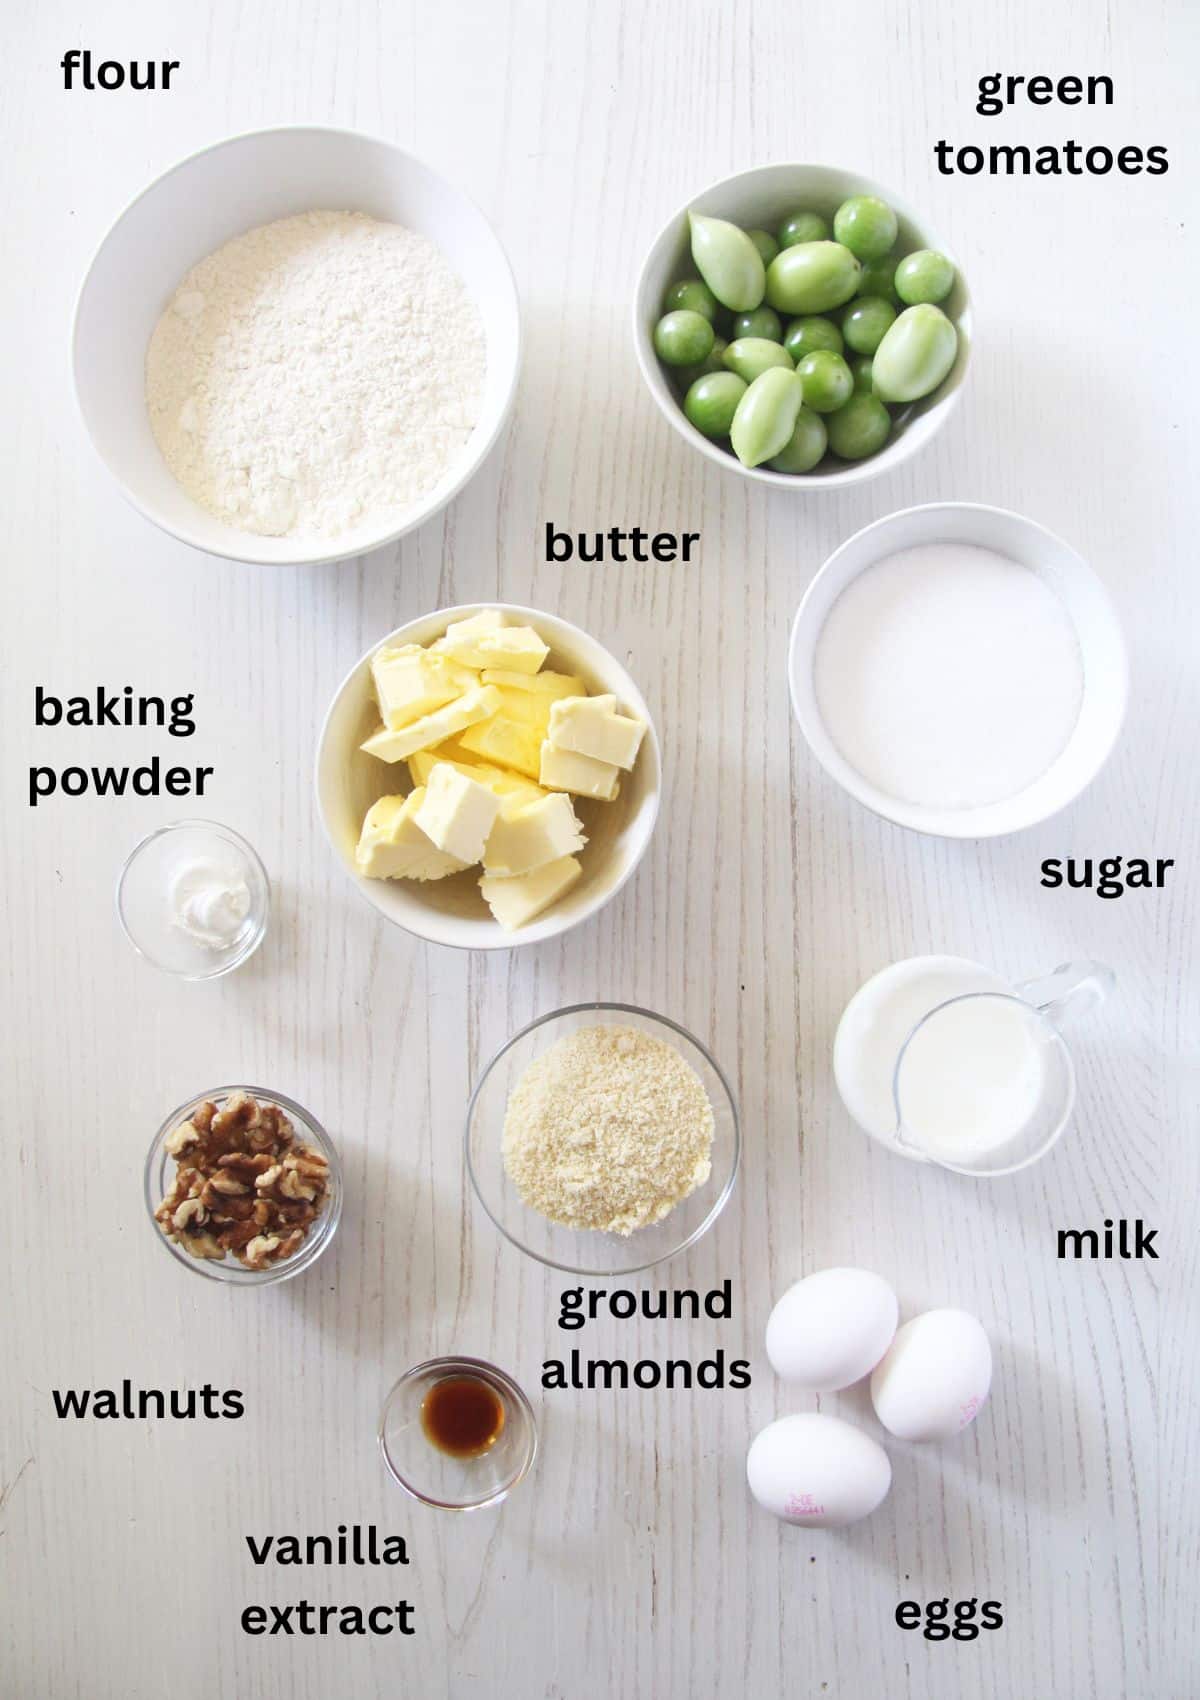 listed ingredients for baking quick bread with green tomatoes and walnuts.